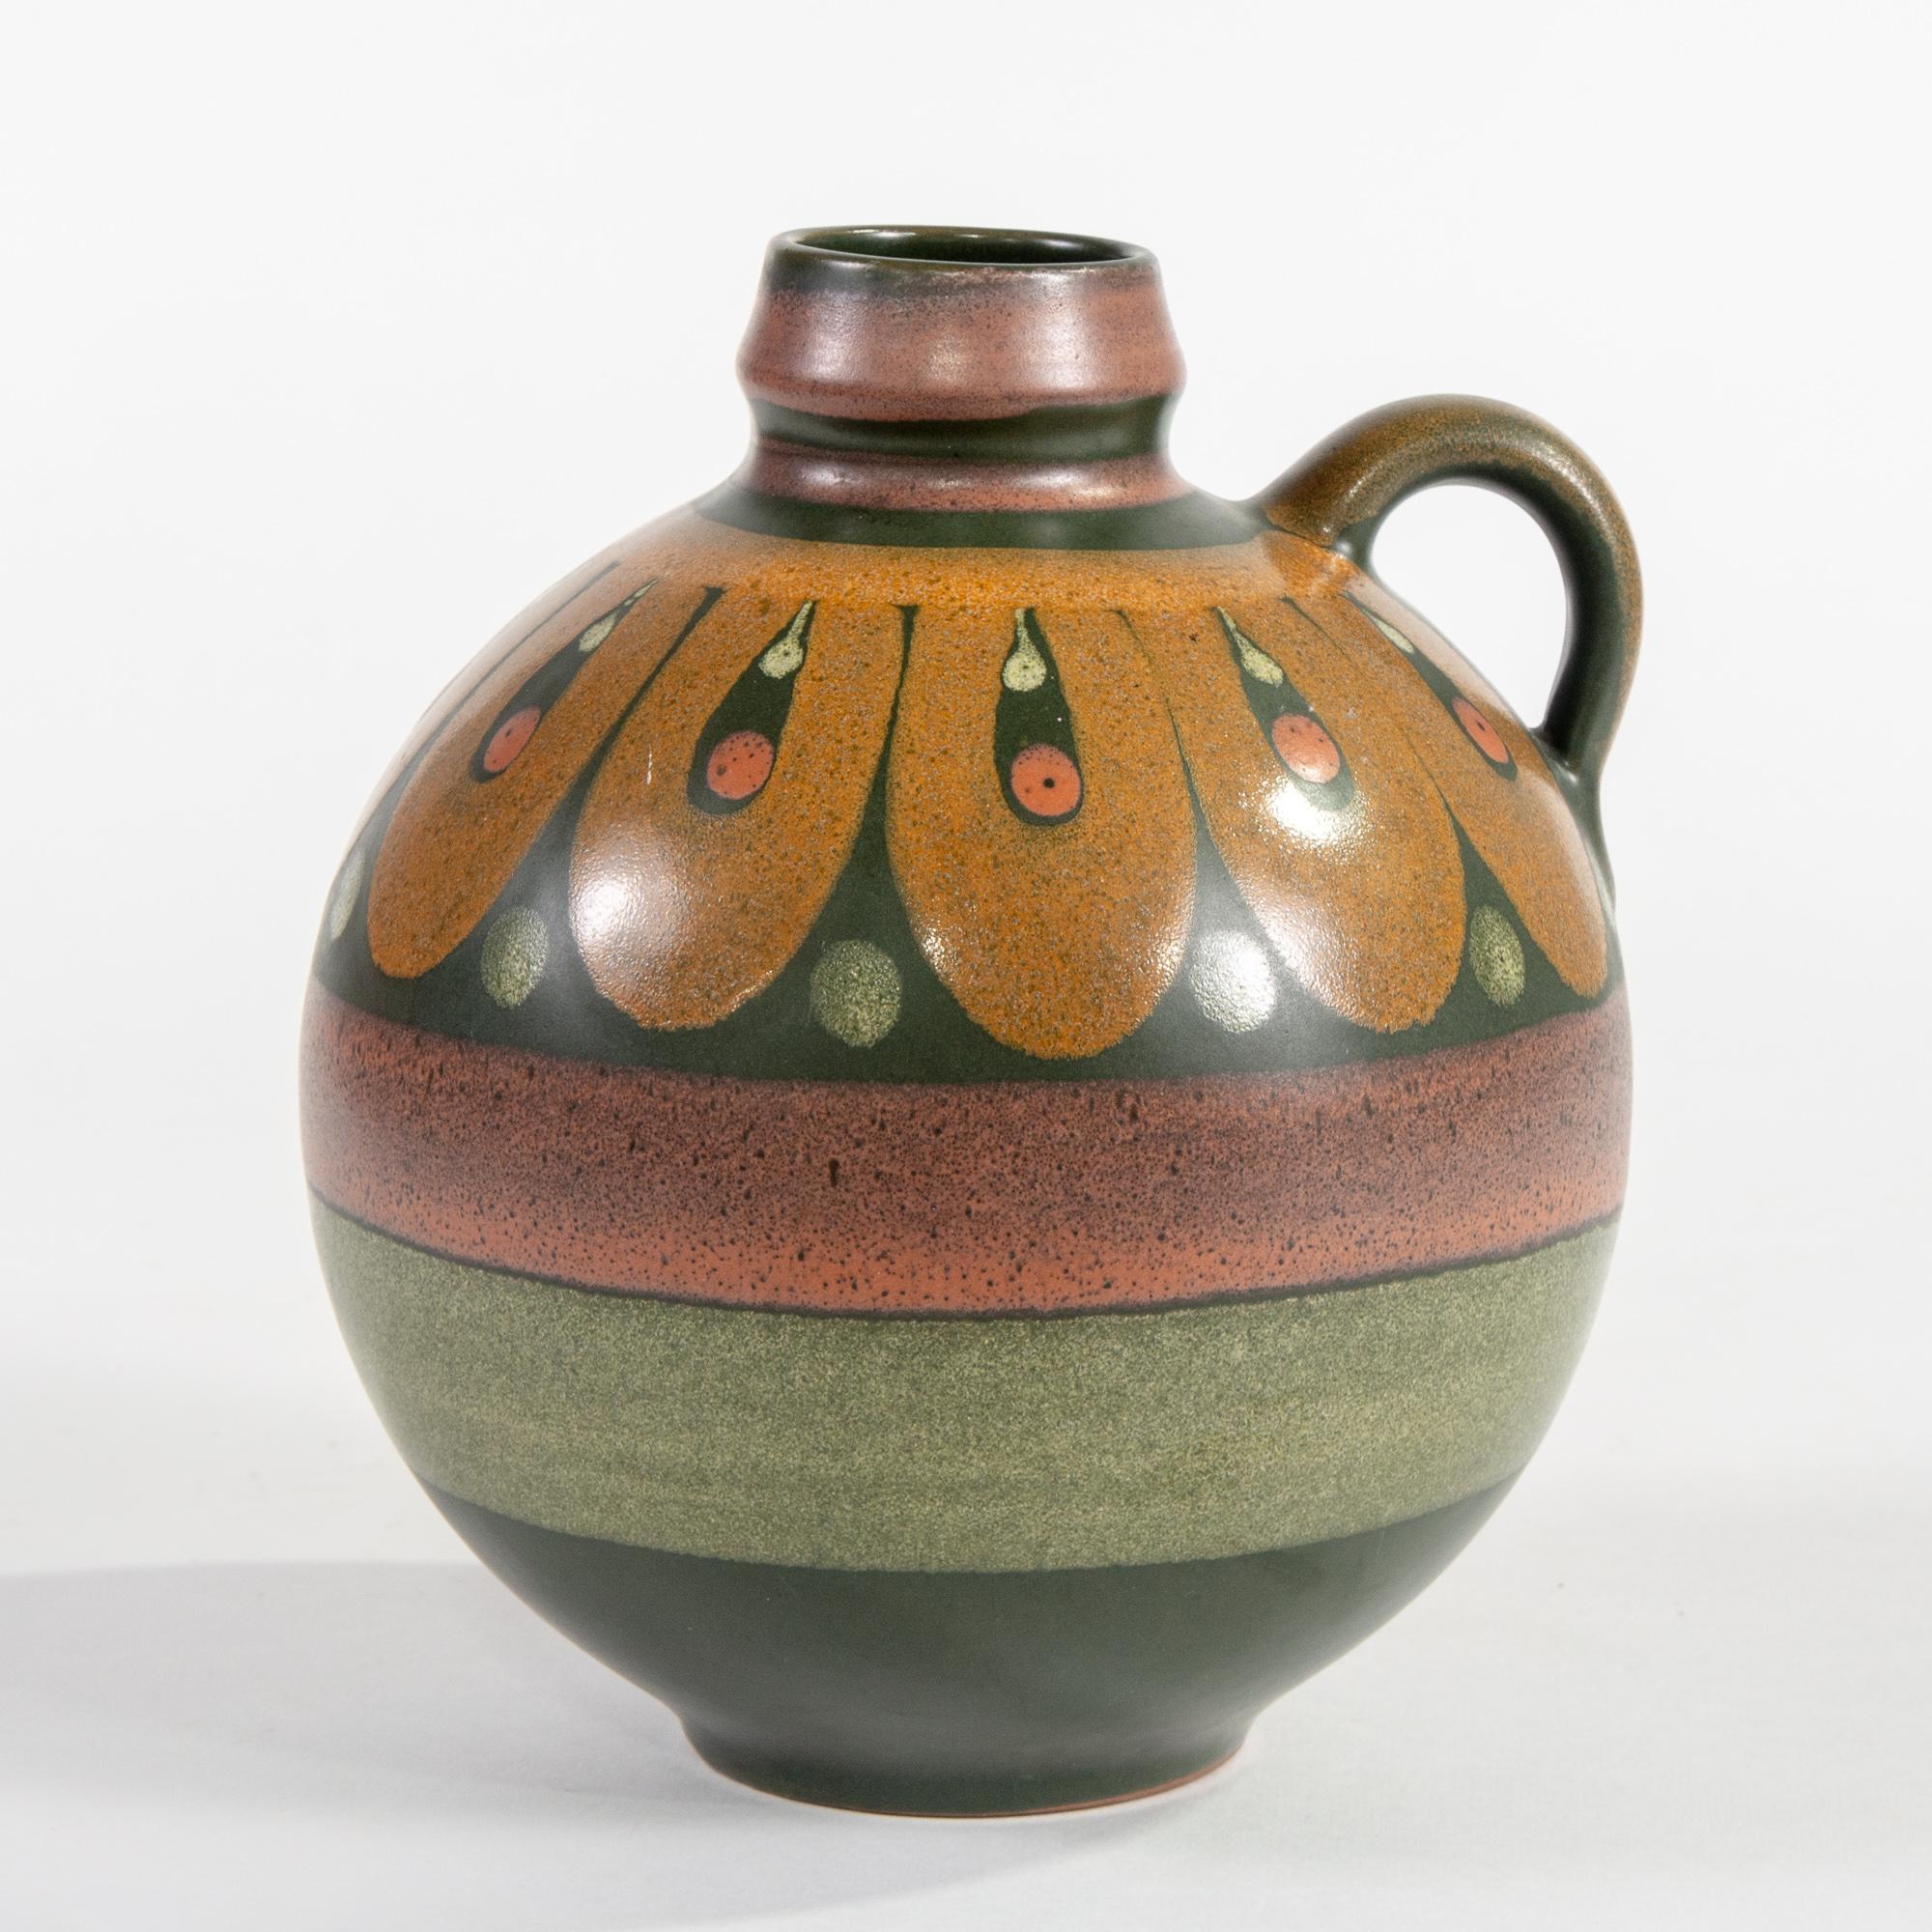 Round jug attributed to Elchinger with glaze in muted green bands and orange-gold looped band at top, circa 1930s. Very good vintage condition with no flaws found.